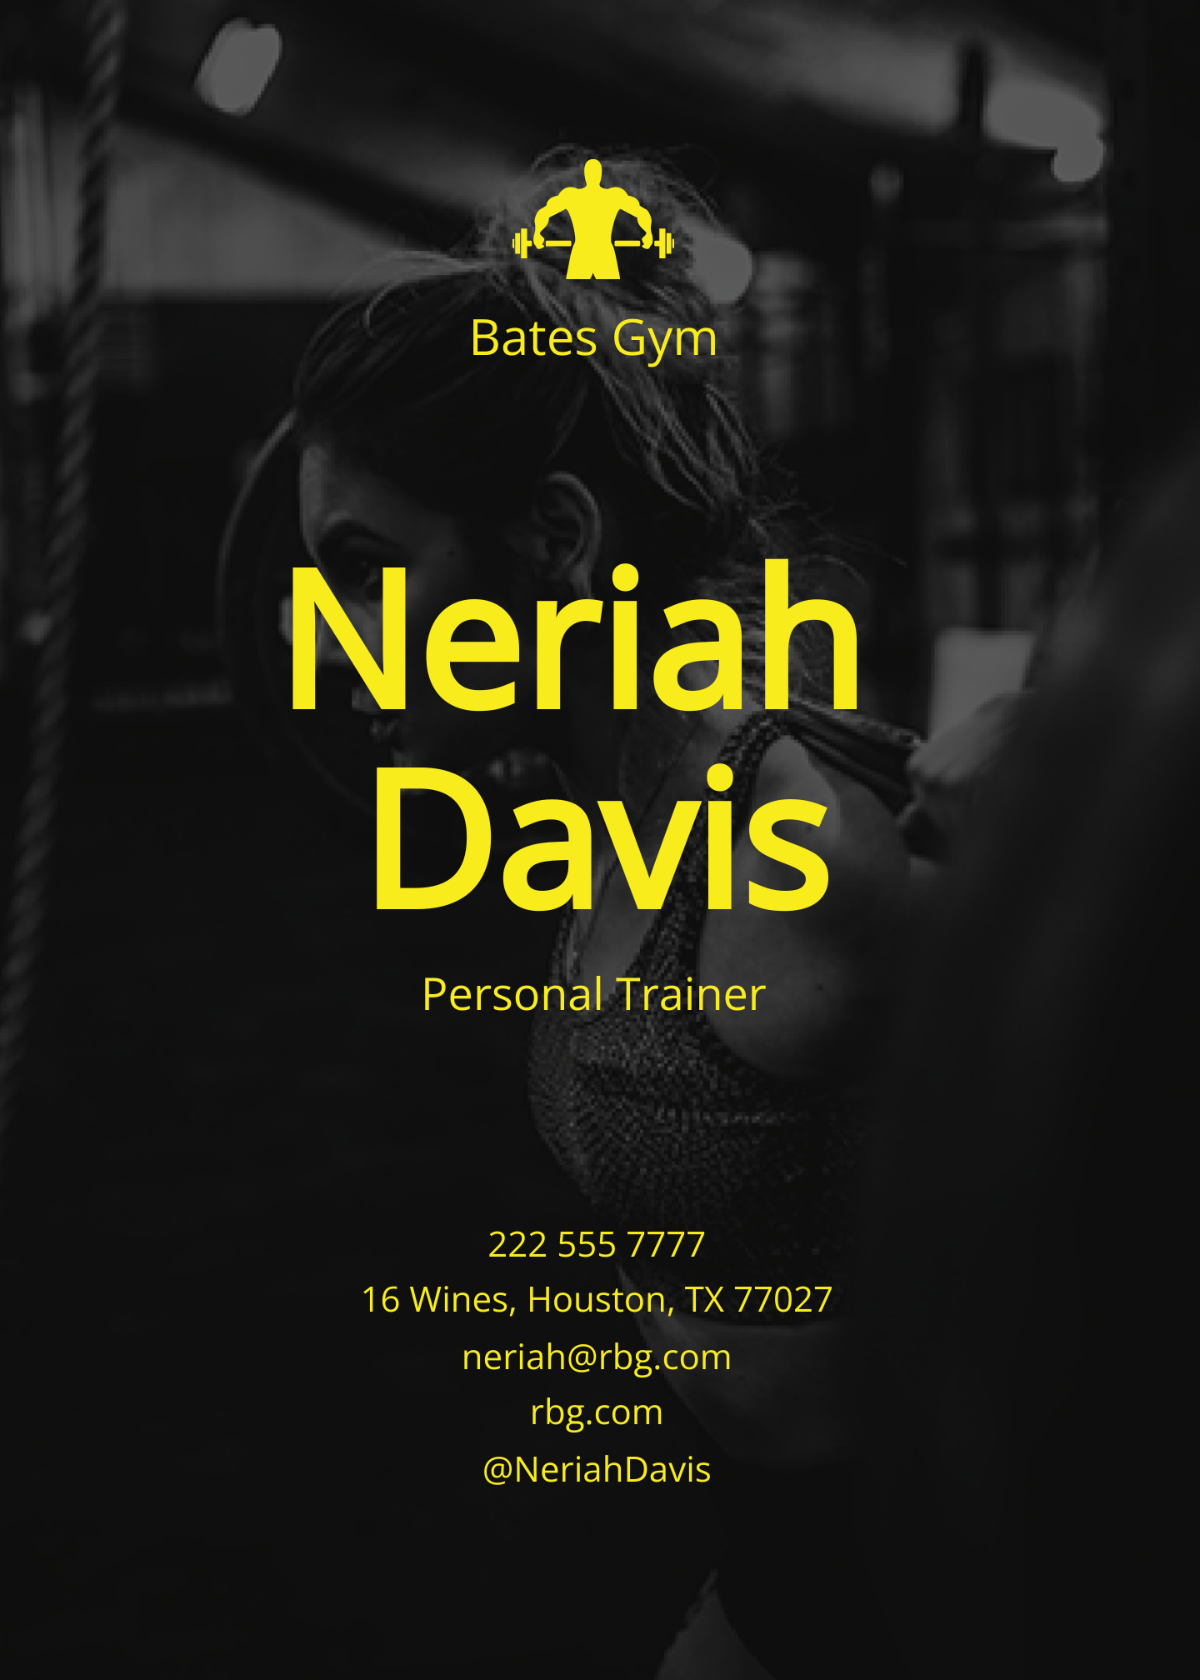 Trainer Card